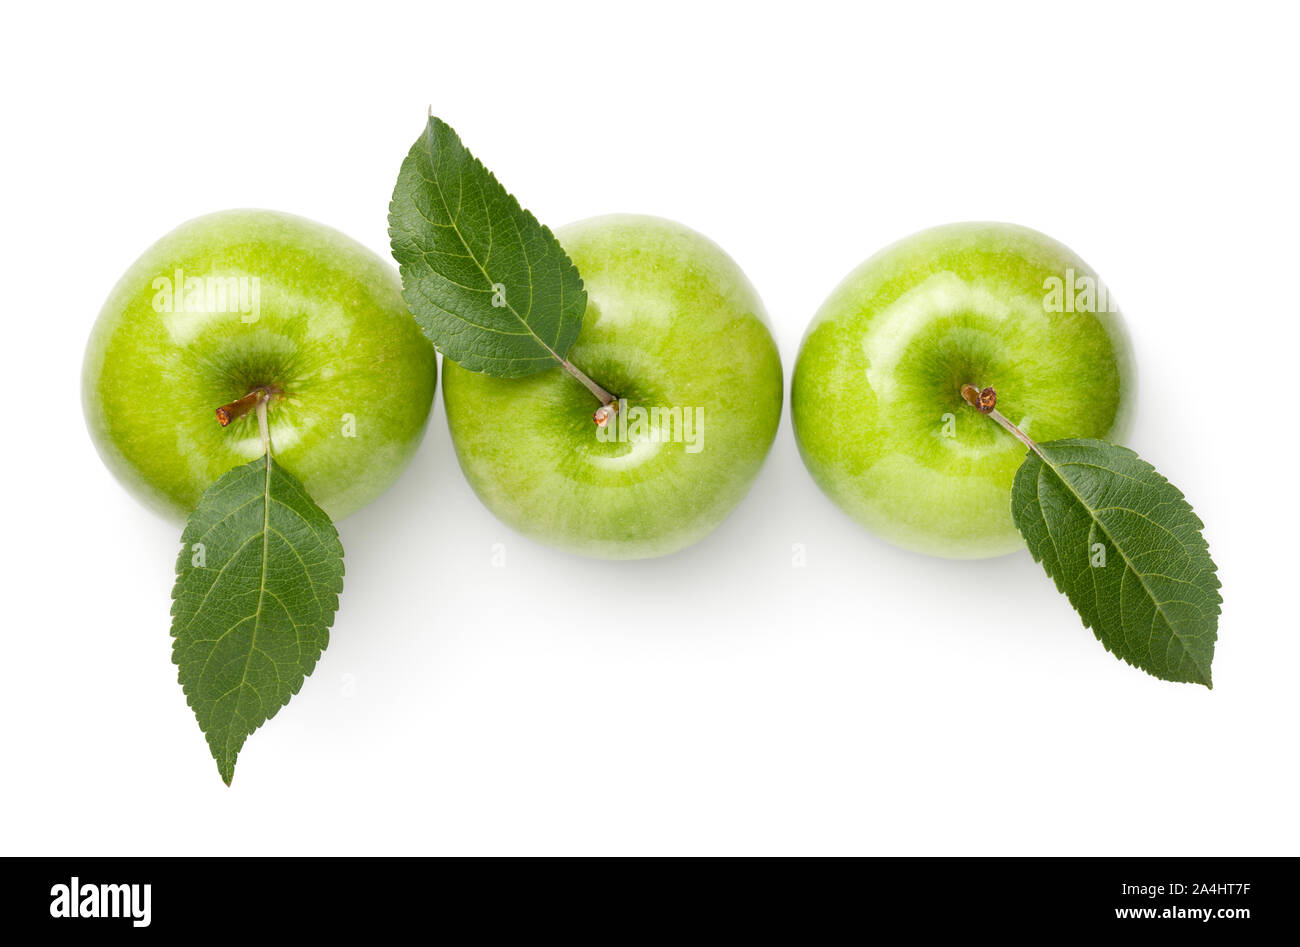 https://c8.alamy.com/comp/2A4HT7F/green-apples-with-leaves-isolated-on-white-background-fresh-granny-smith-apple-top-view-flat-lay-2A4HT7F.jpg